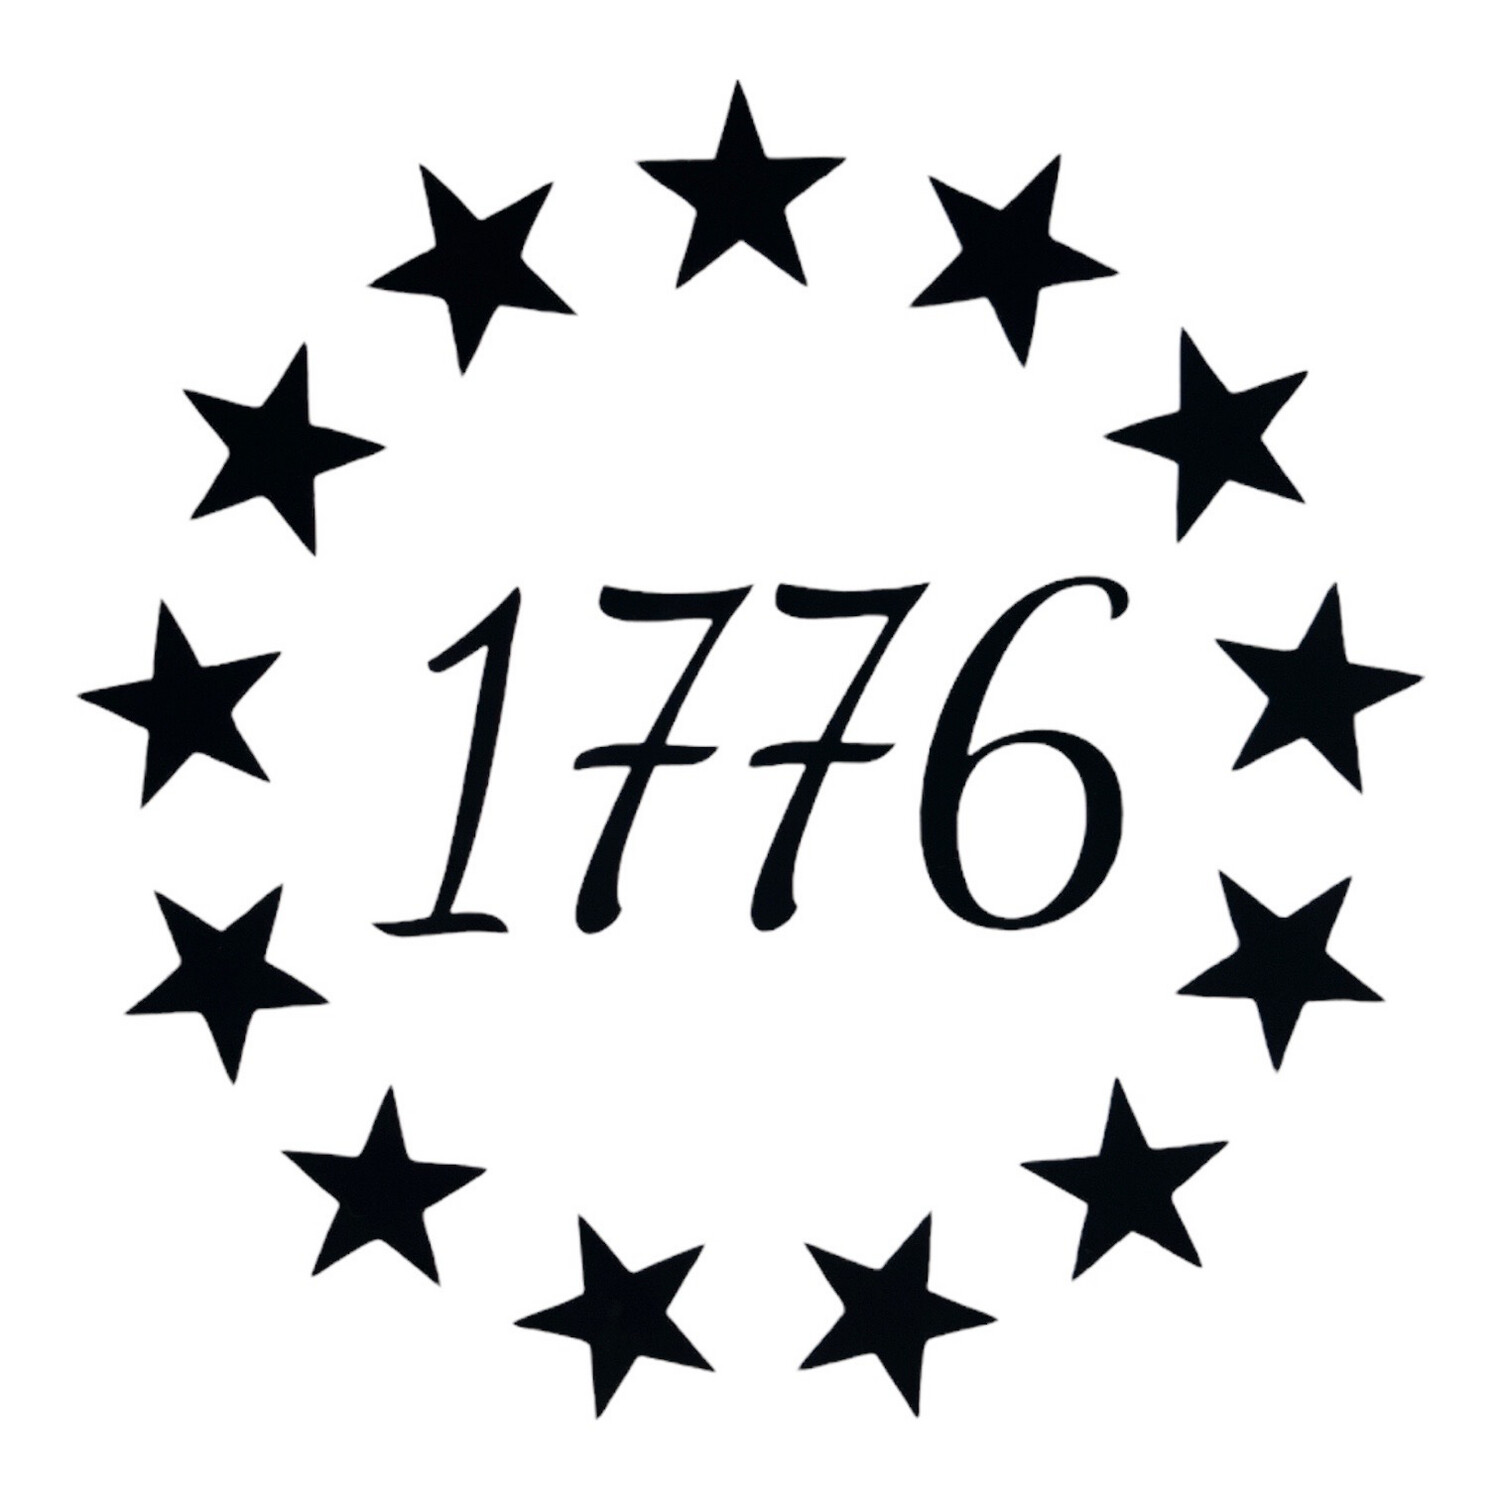 1776 with Stars Decal